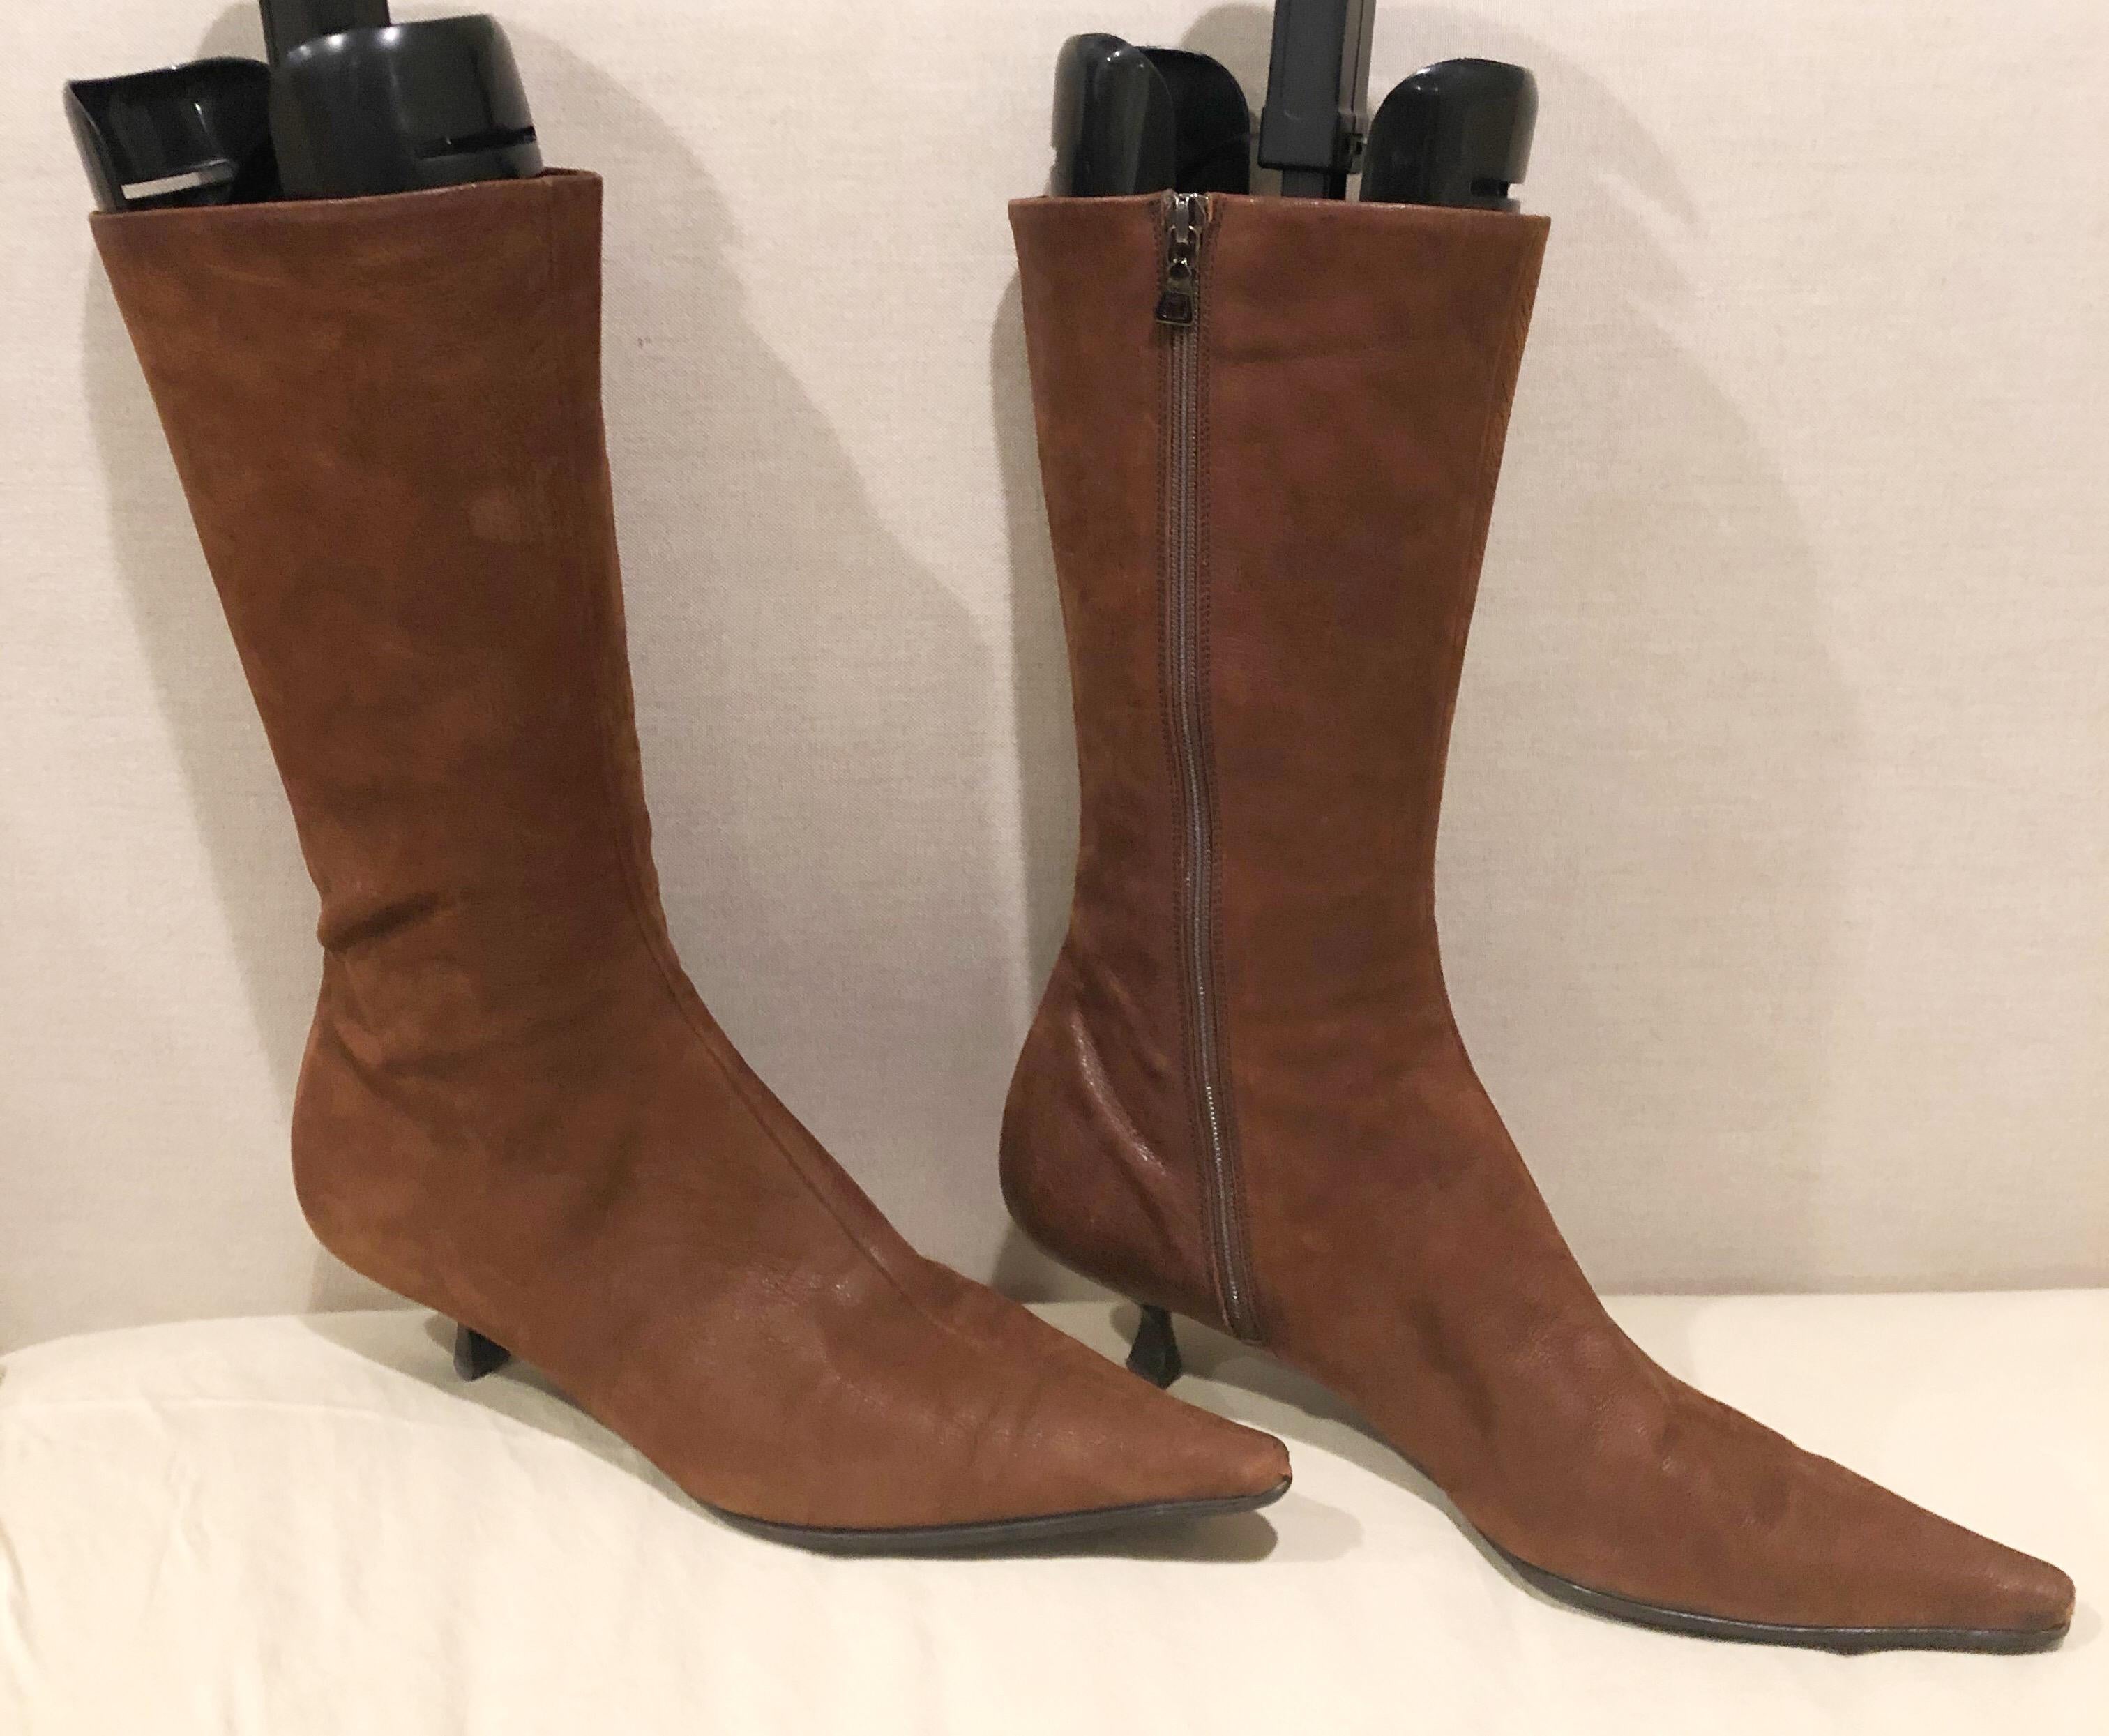 Stylish early 2000s PRADA Size 38.5 (US 8.5) medium brown mid calf kitten heel boot! The perfect length in between ankle boots and knee high boots! Zipper up the inner ankle. Leather soles with rubber protection to prevent slipping. Super